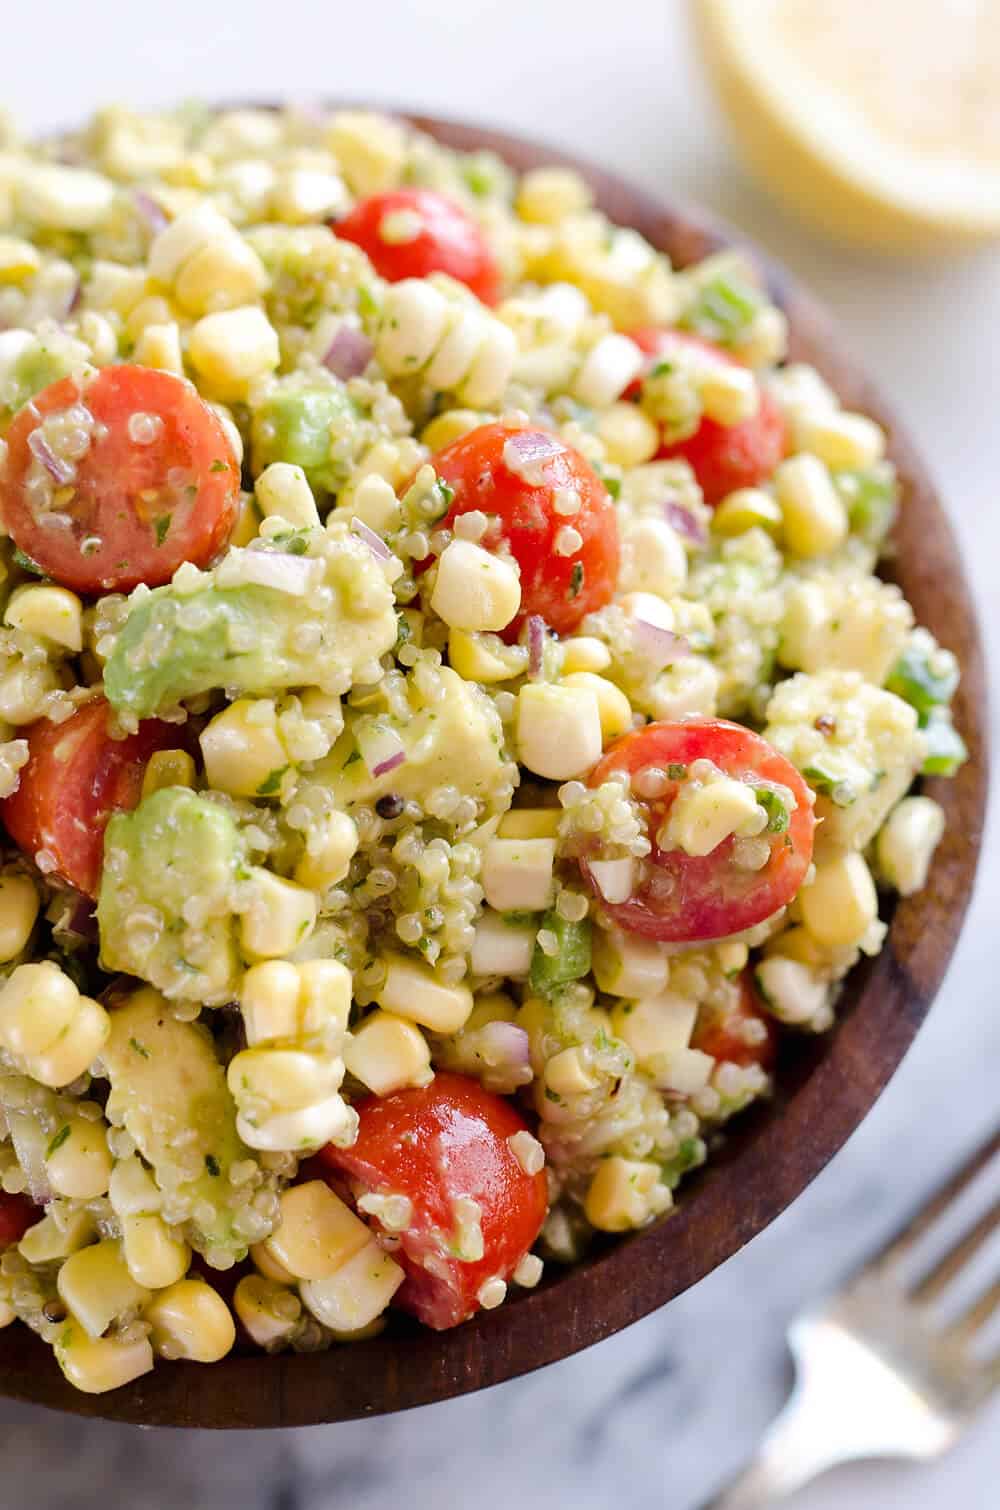 Cilantro Quinoa Corn Salad is a light and refreshing salad perfect for an easy packed lunch or a side salad for a cookout. This salad is a healthy combination of quinoa, corn, avocado and a light Cilantro Lemon dressing with a kick of spice from fresh jalapeños for a dish you will love!